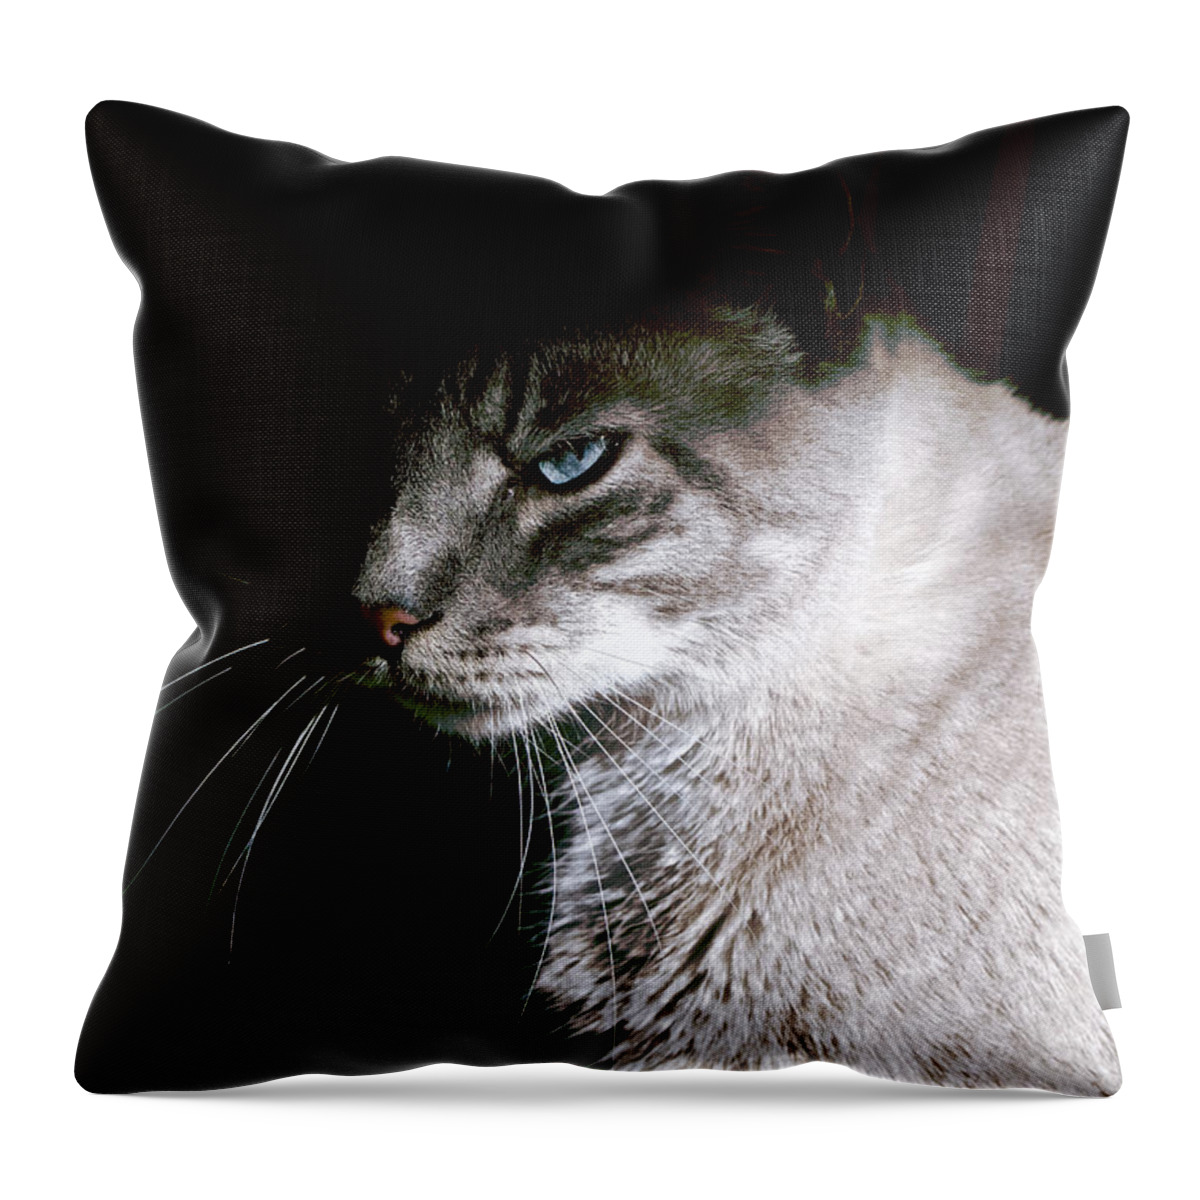 Cat Throw Pillow featuring the photograph A Glare by Rachel Morrison